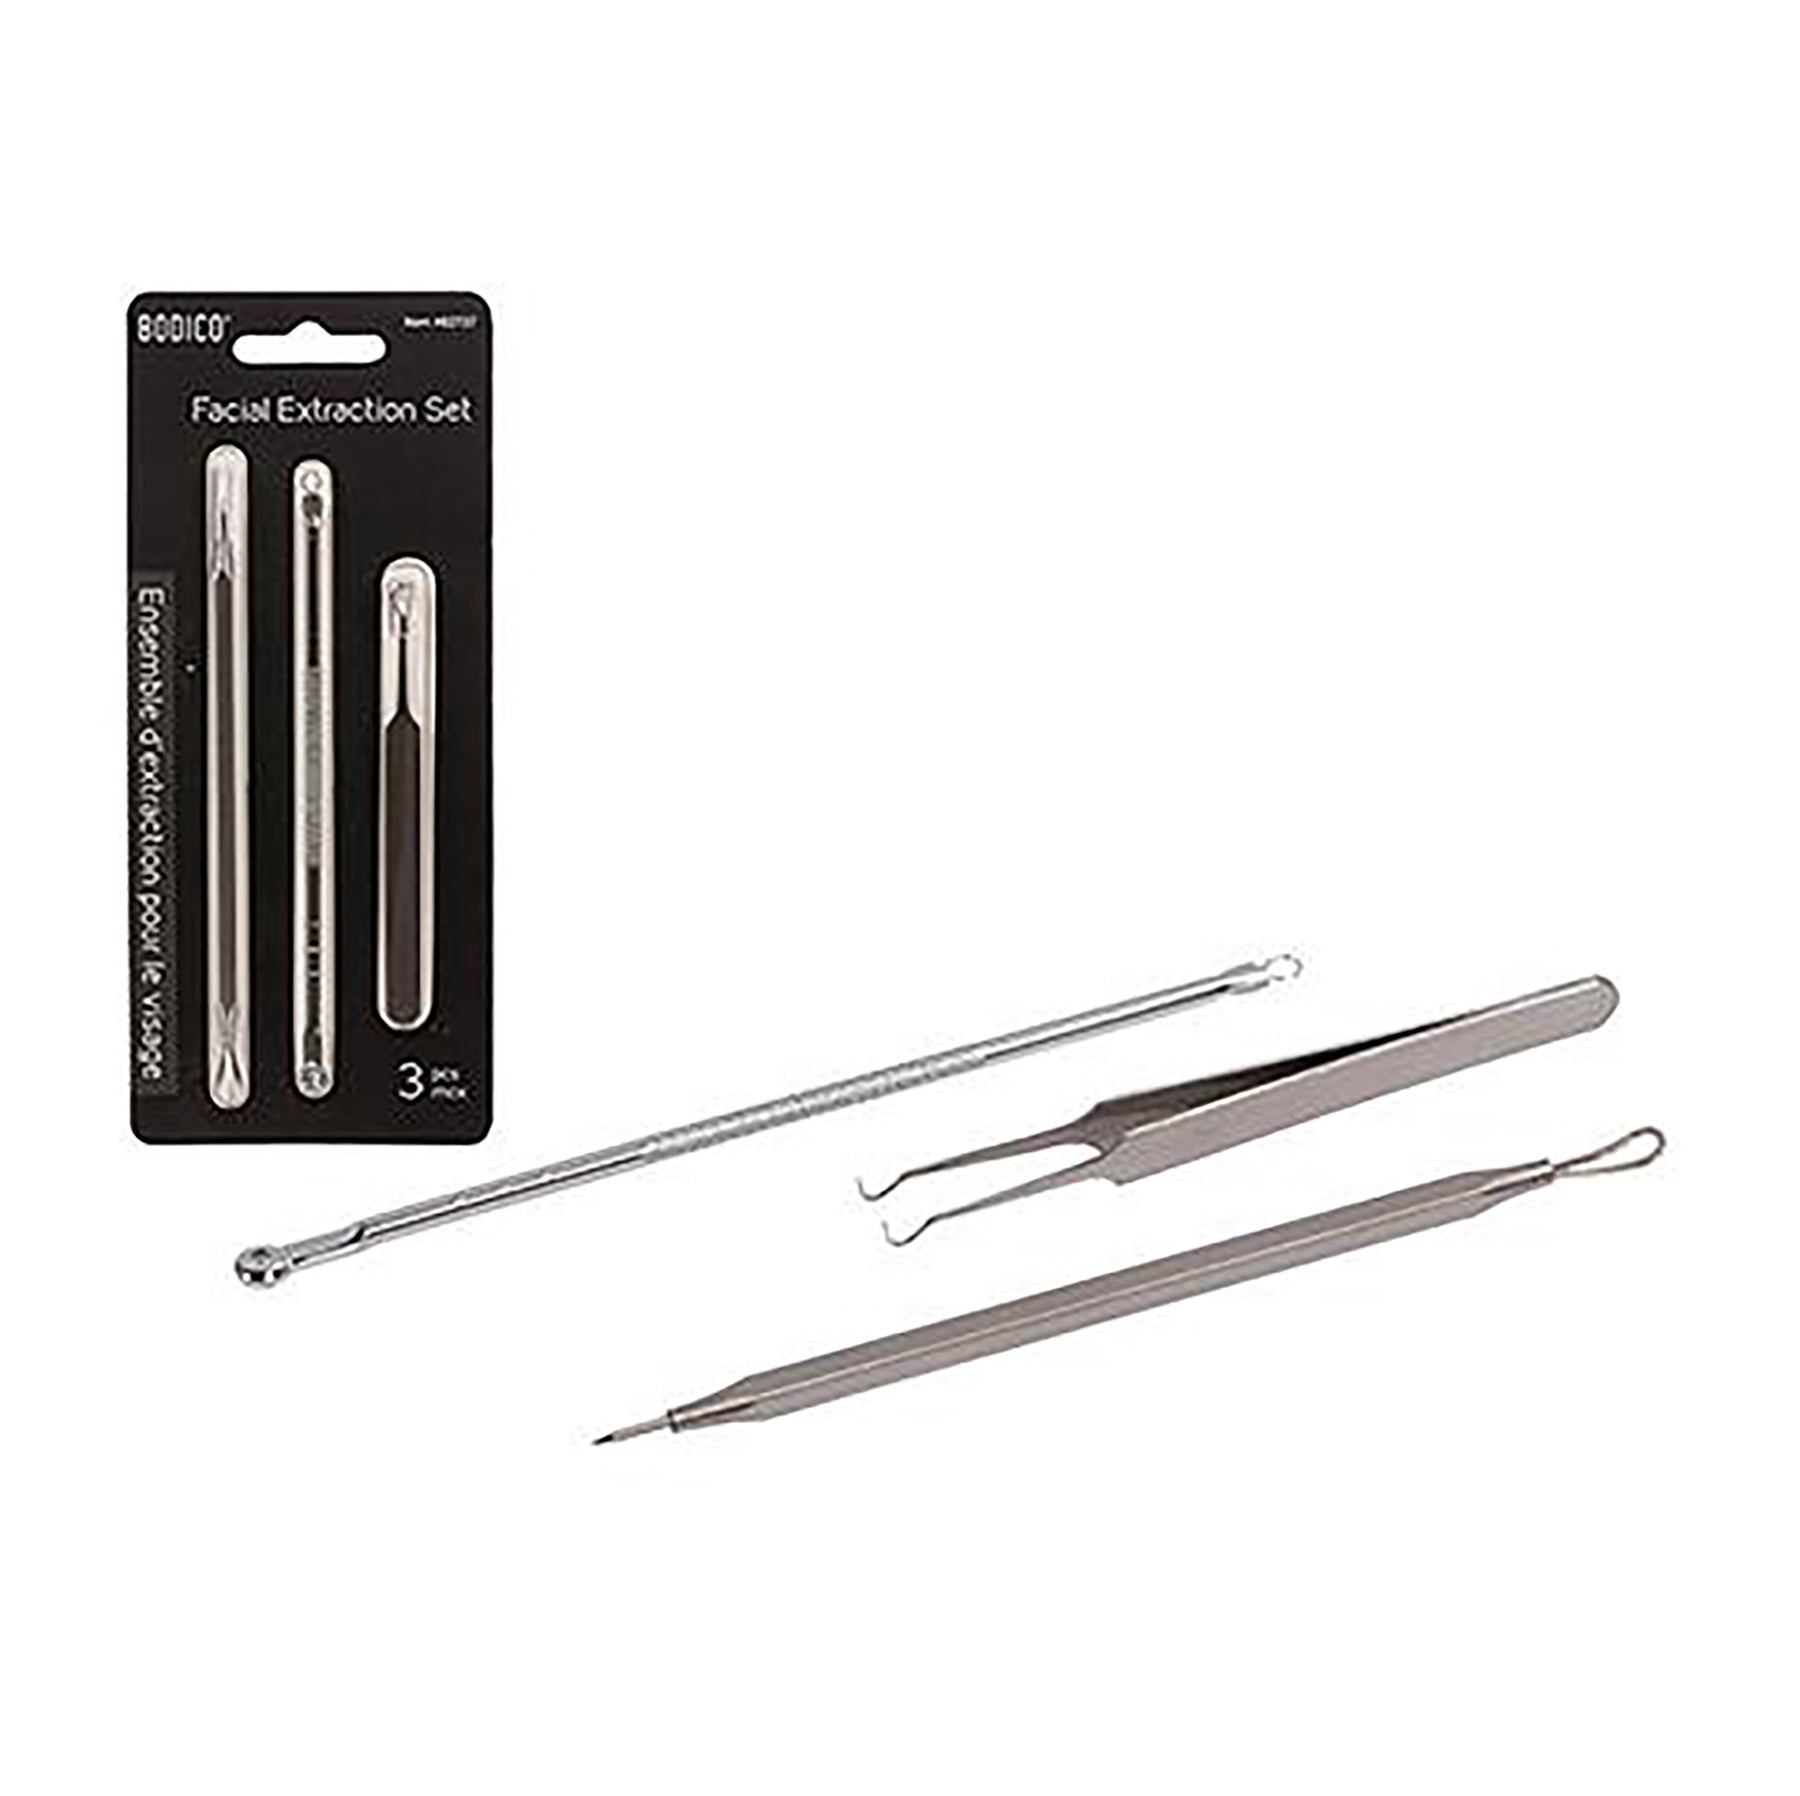 Bodico 3pcs Facial Extraction Set Stainless Steel